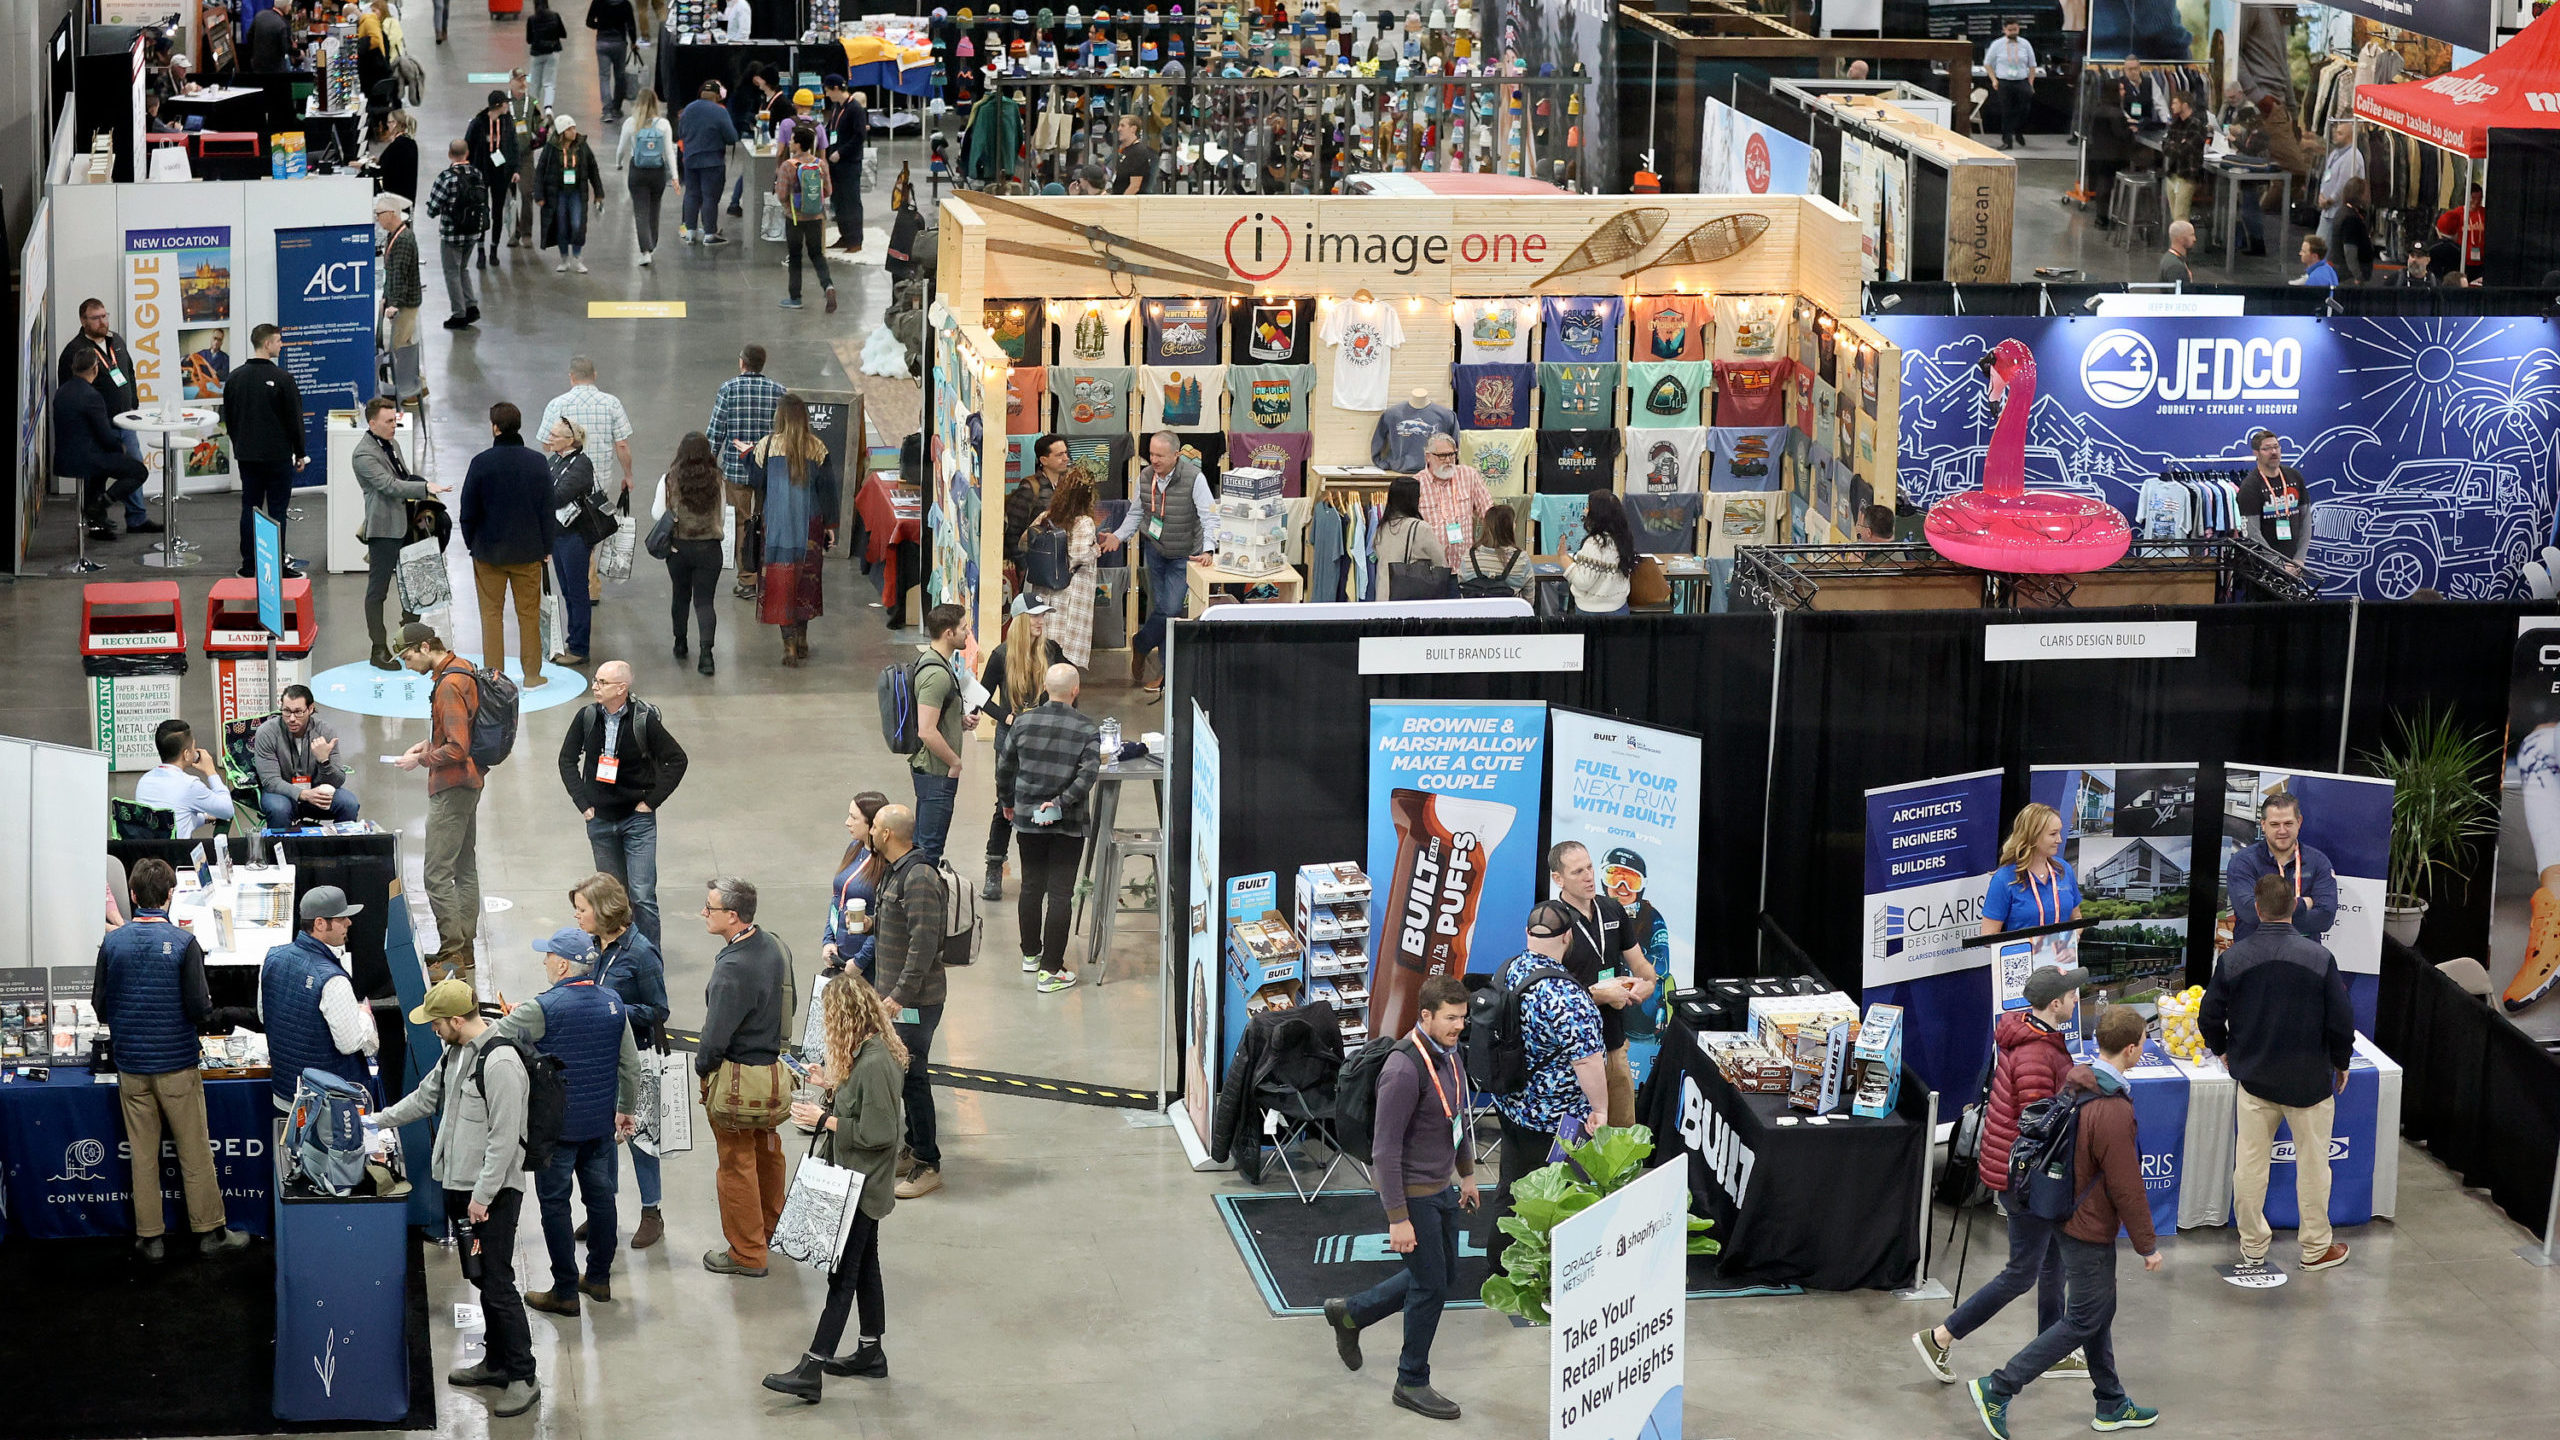 outdoor retailer trade show pictured...